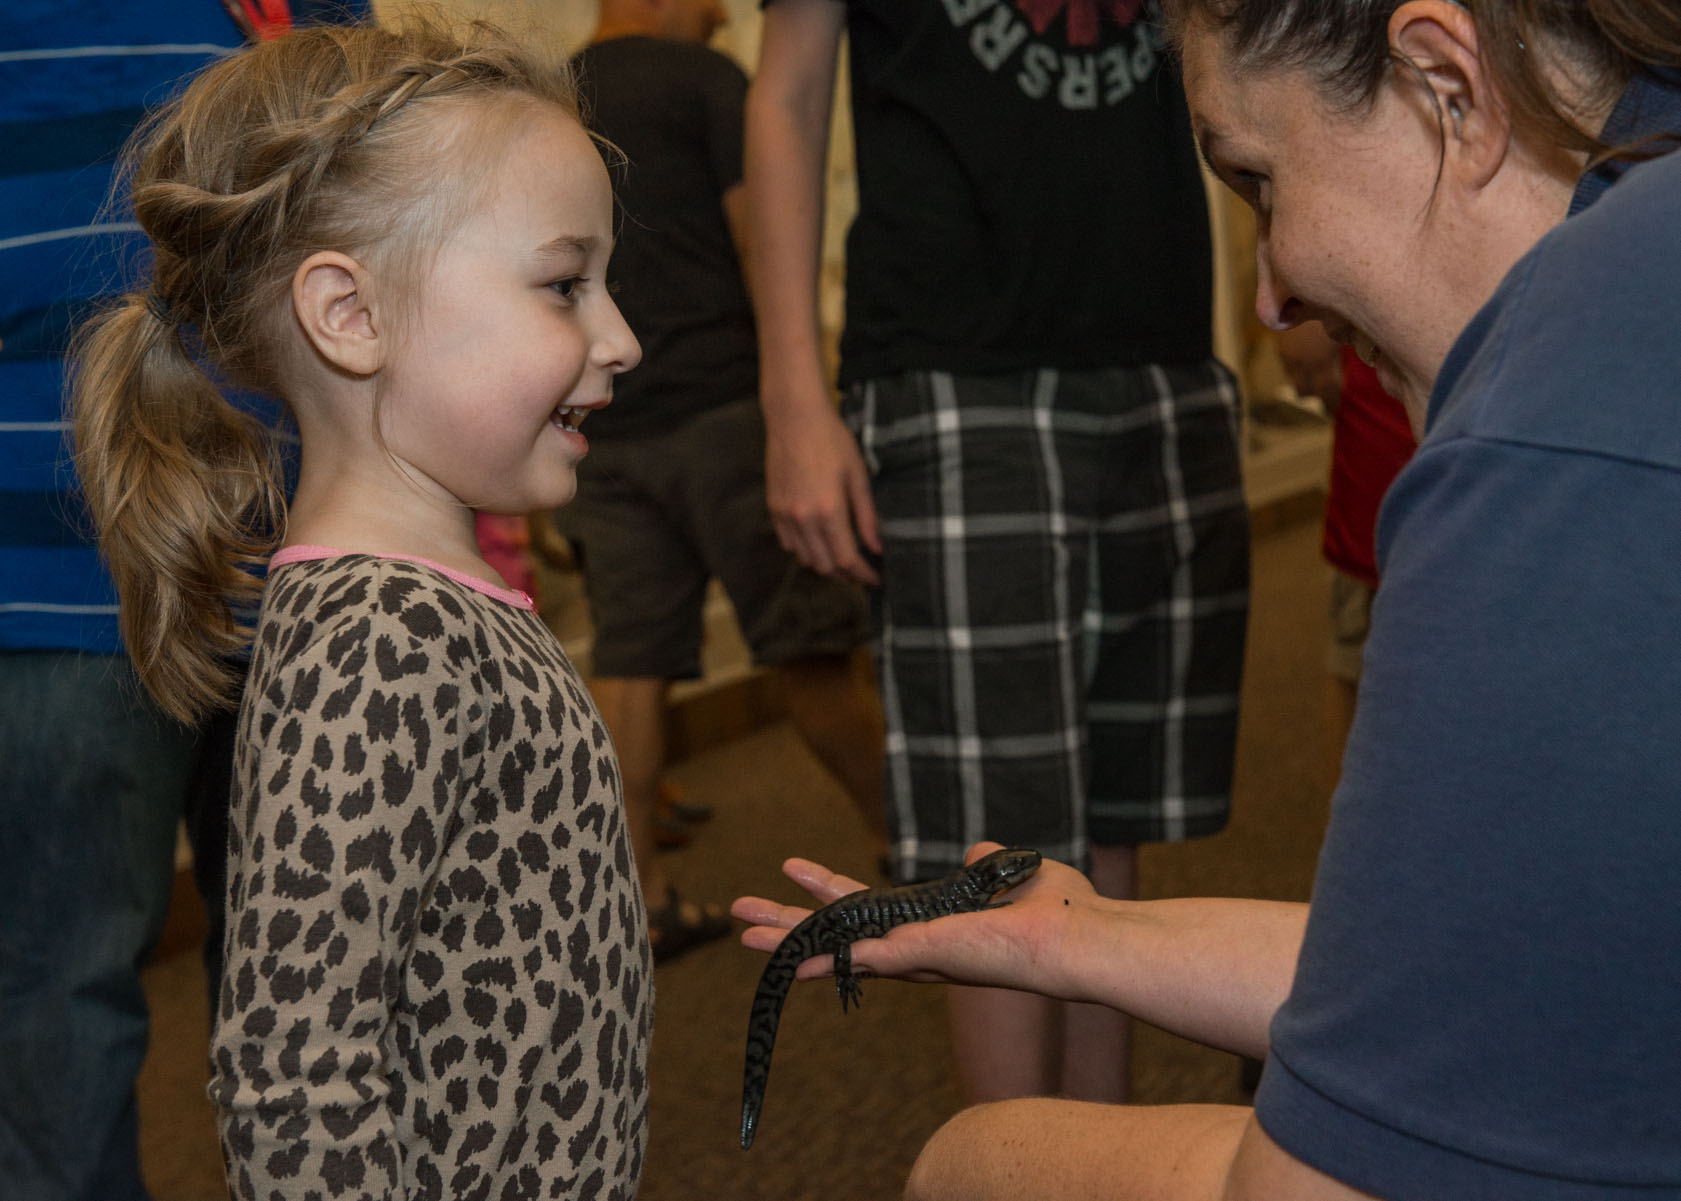 A young visitor learns more about salamanders during a live animal encounter with the Nebraska Game and Parks Commission's Project WILD during "Archie's Late Night Party" in 2015 at Morrill Hall.